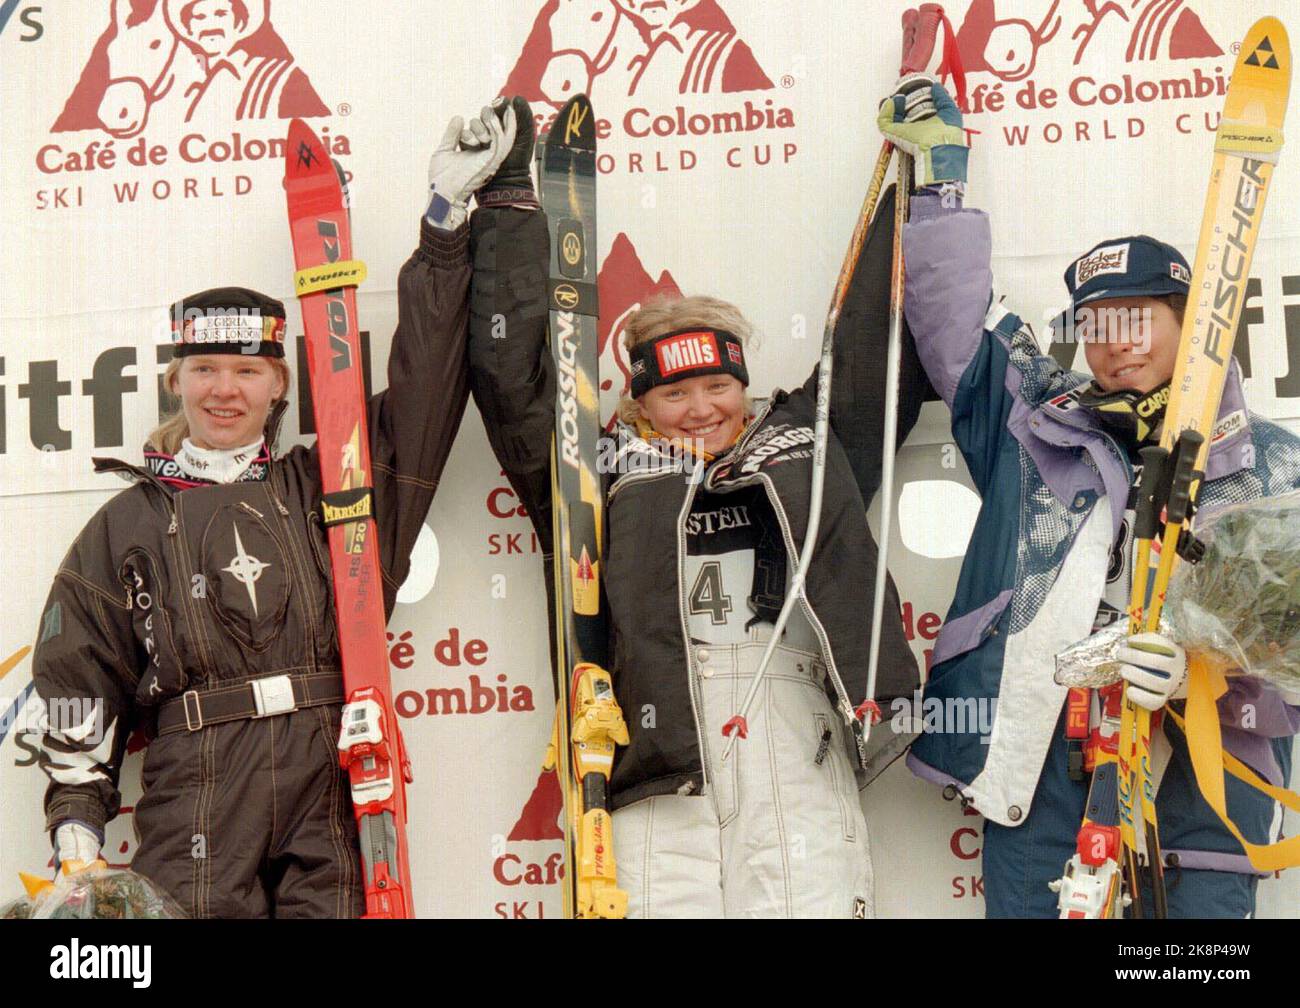 Kvitfjell. Alpine WC Final. Alpint, World Cup finish. Super g, women, victory pallet. Ingeborg Helen Marken (Middle) from Norway Won Todays Super G in the Ski World Cup in Kvitfjell, Norway, Wednesday the 7th of March 1996. Katja Seizerer (Left) from Germany Came Second. She is the overall winner of the ski world cup and the Will Also Receive the Title in the Overall Super G. Third Came Italy Isolde Kostner. - - Picture about 4 MB - - (AP -Photo: Lise Azerud) Stock Photo